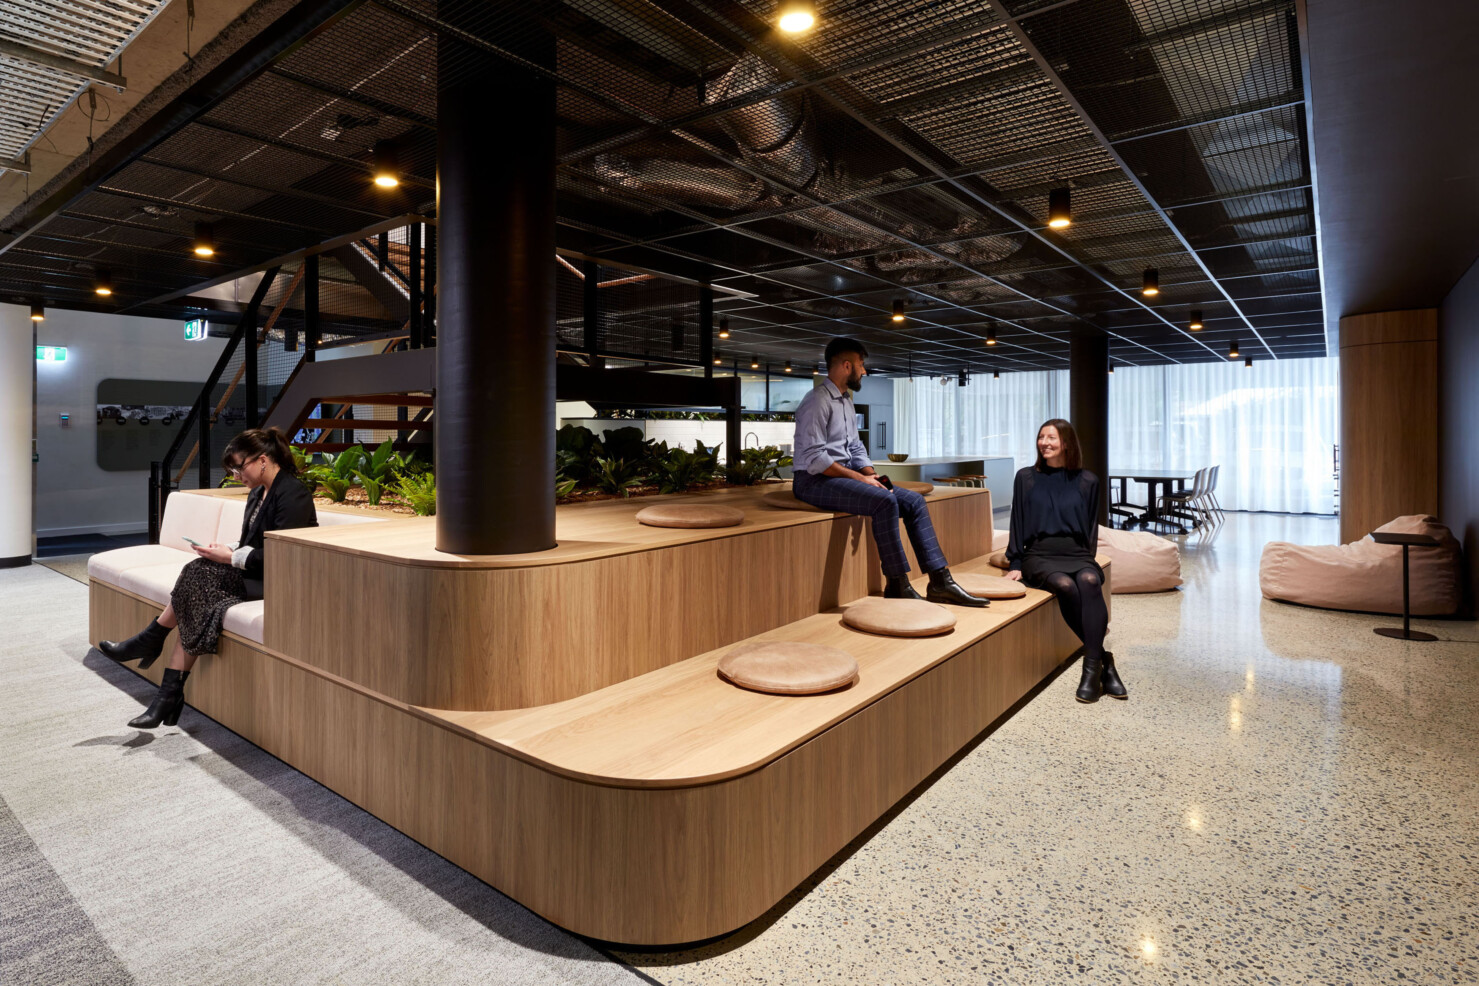 A central feature stairway becomes the gathering point for staff to move about the office and interact with each other. Polished floors, black steel and exposed services are softened by plants, custom joinery in warm wood and soft furnishings in pale pink. A floating platform provides a tiered seating space for staff to sit or visitors to wait near the entry of the office. A large kitchen and dining area is in the background with sheer curtains letting in light from the full height windows to the rear of the space.